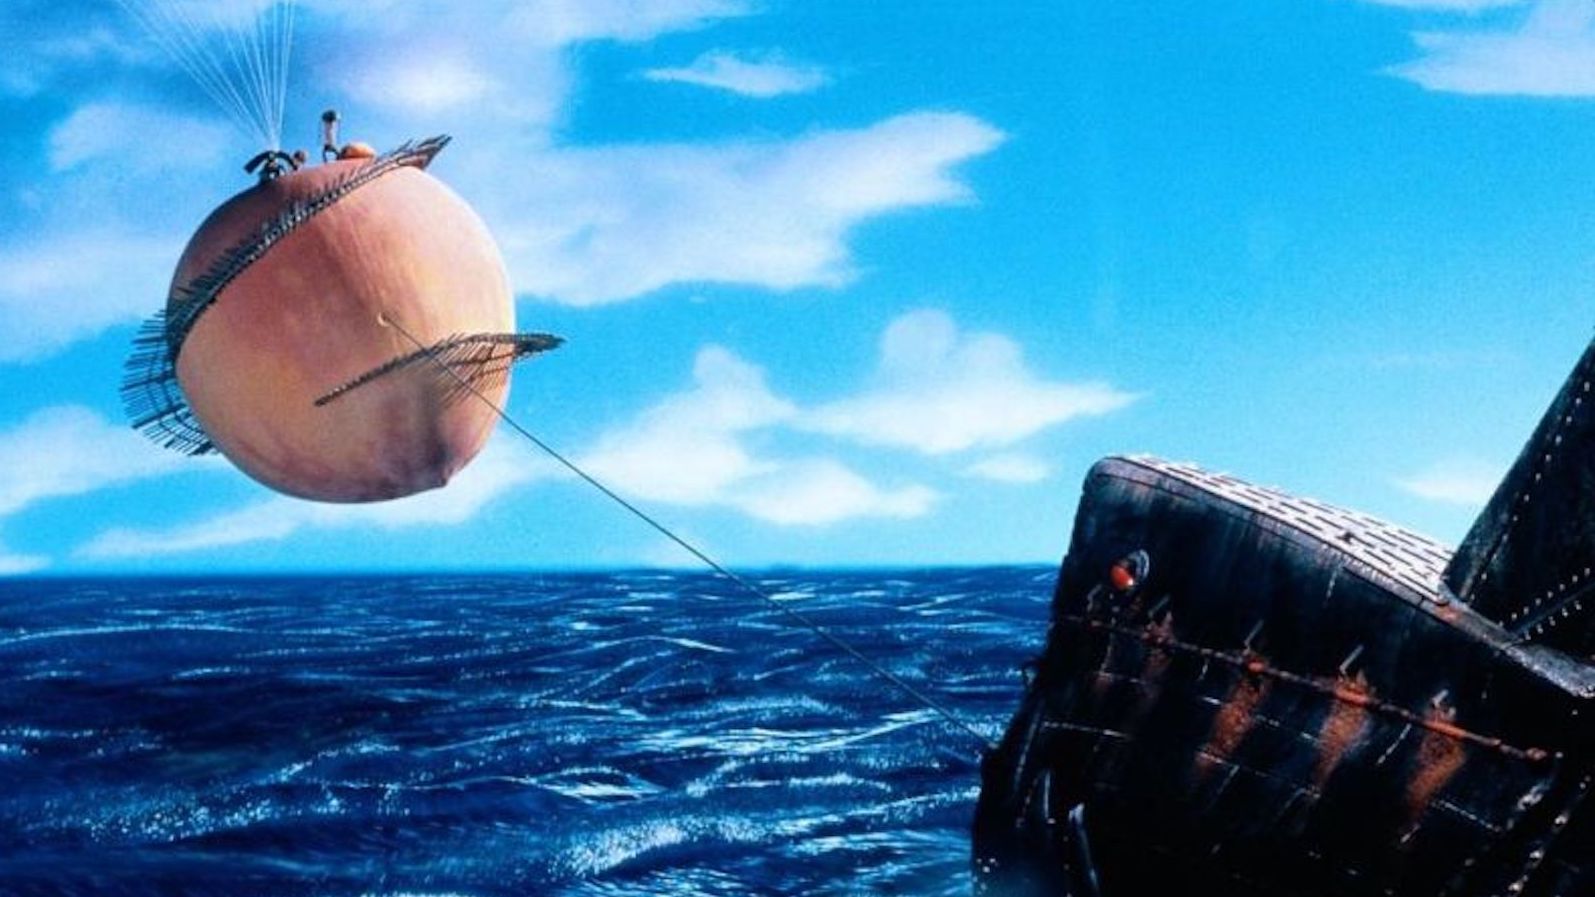 A giant peach floats in the sky over the sea connected to a rope tethered to a boat